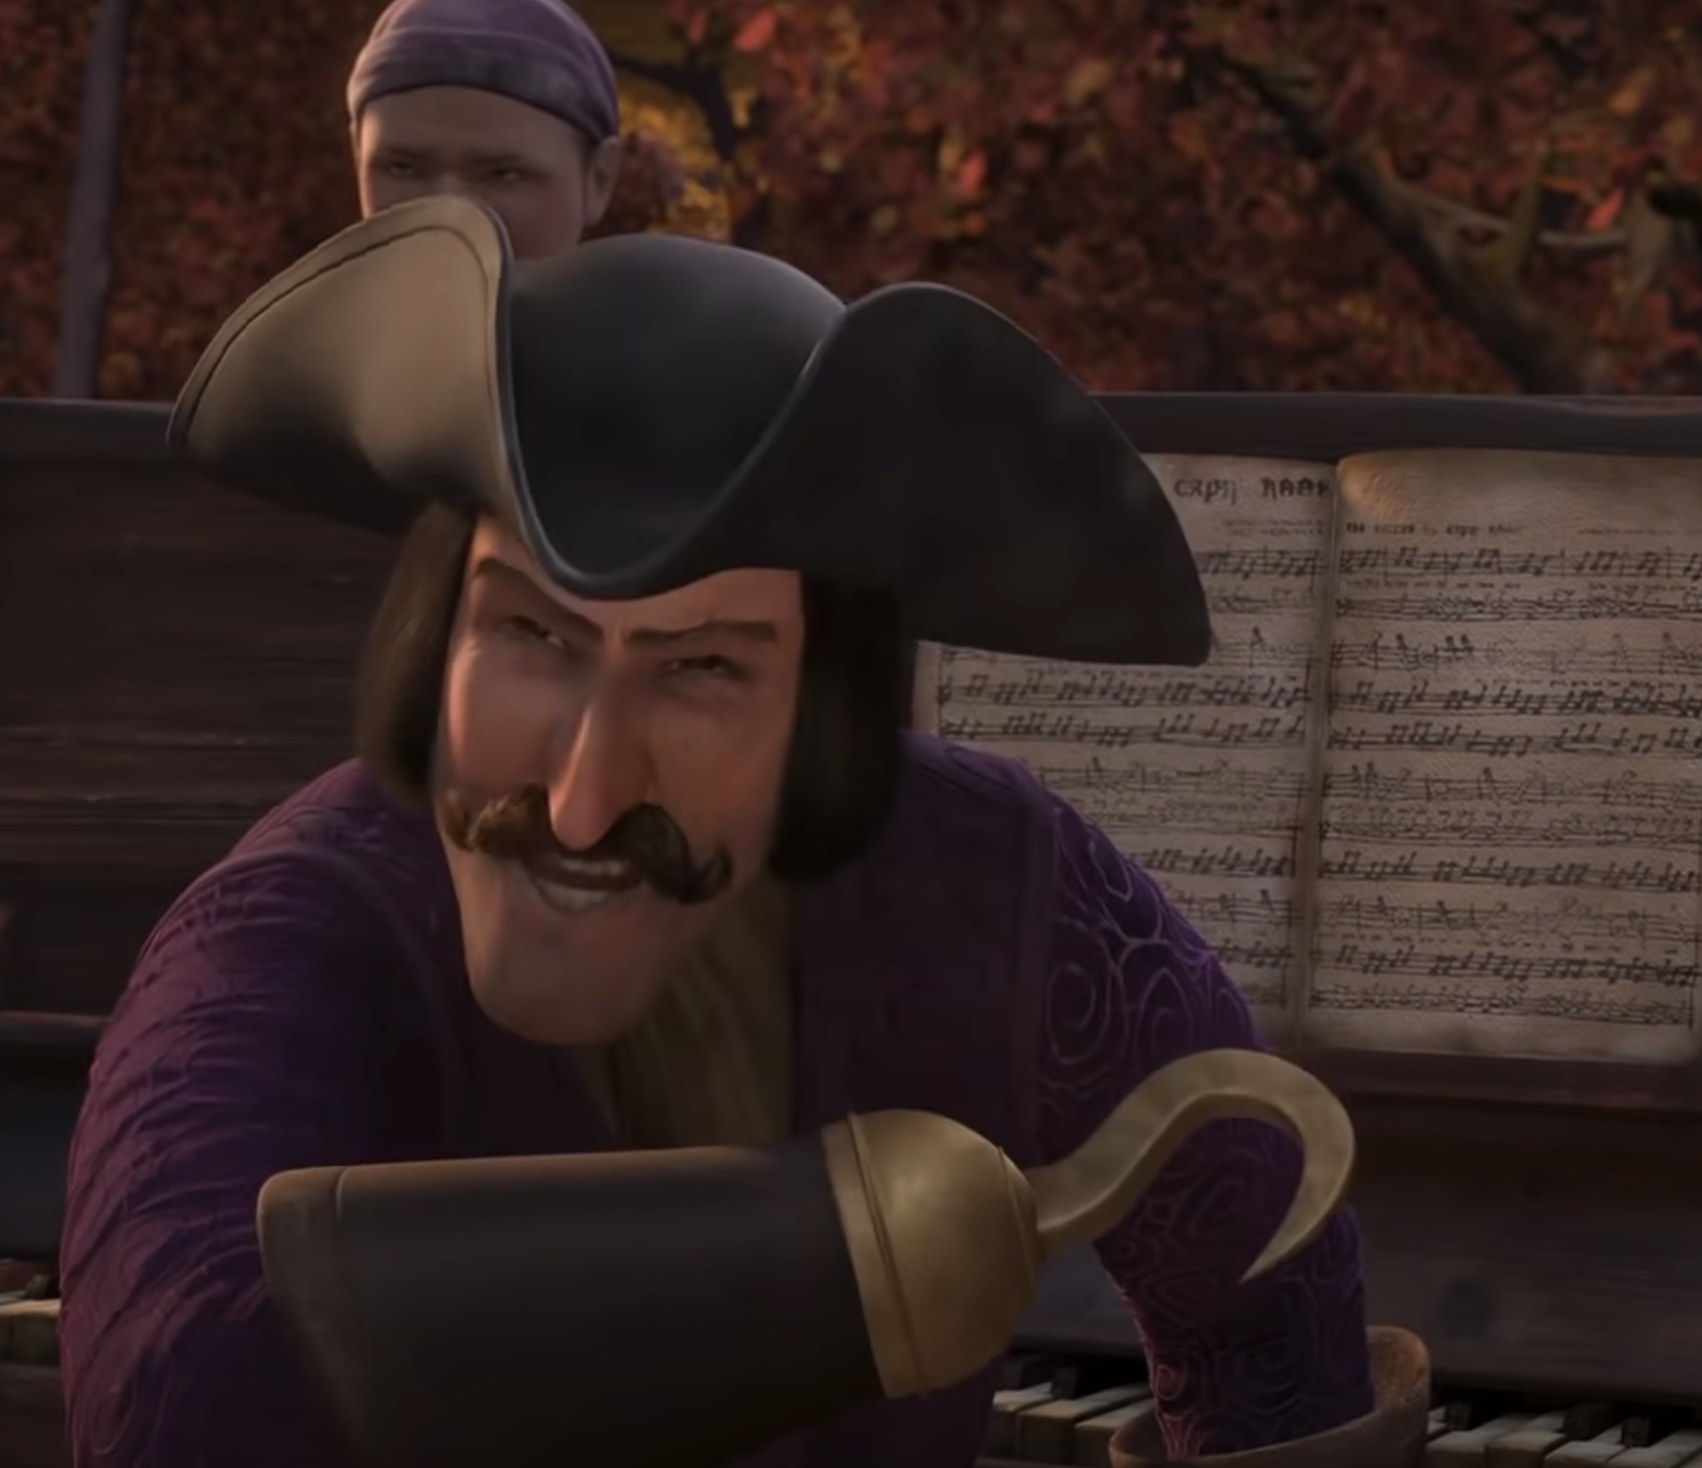 an animated man with a mustache, a pirate hat, and a hook for a hand